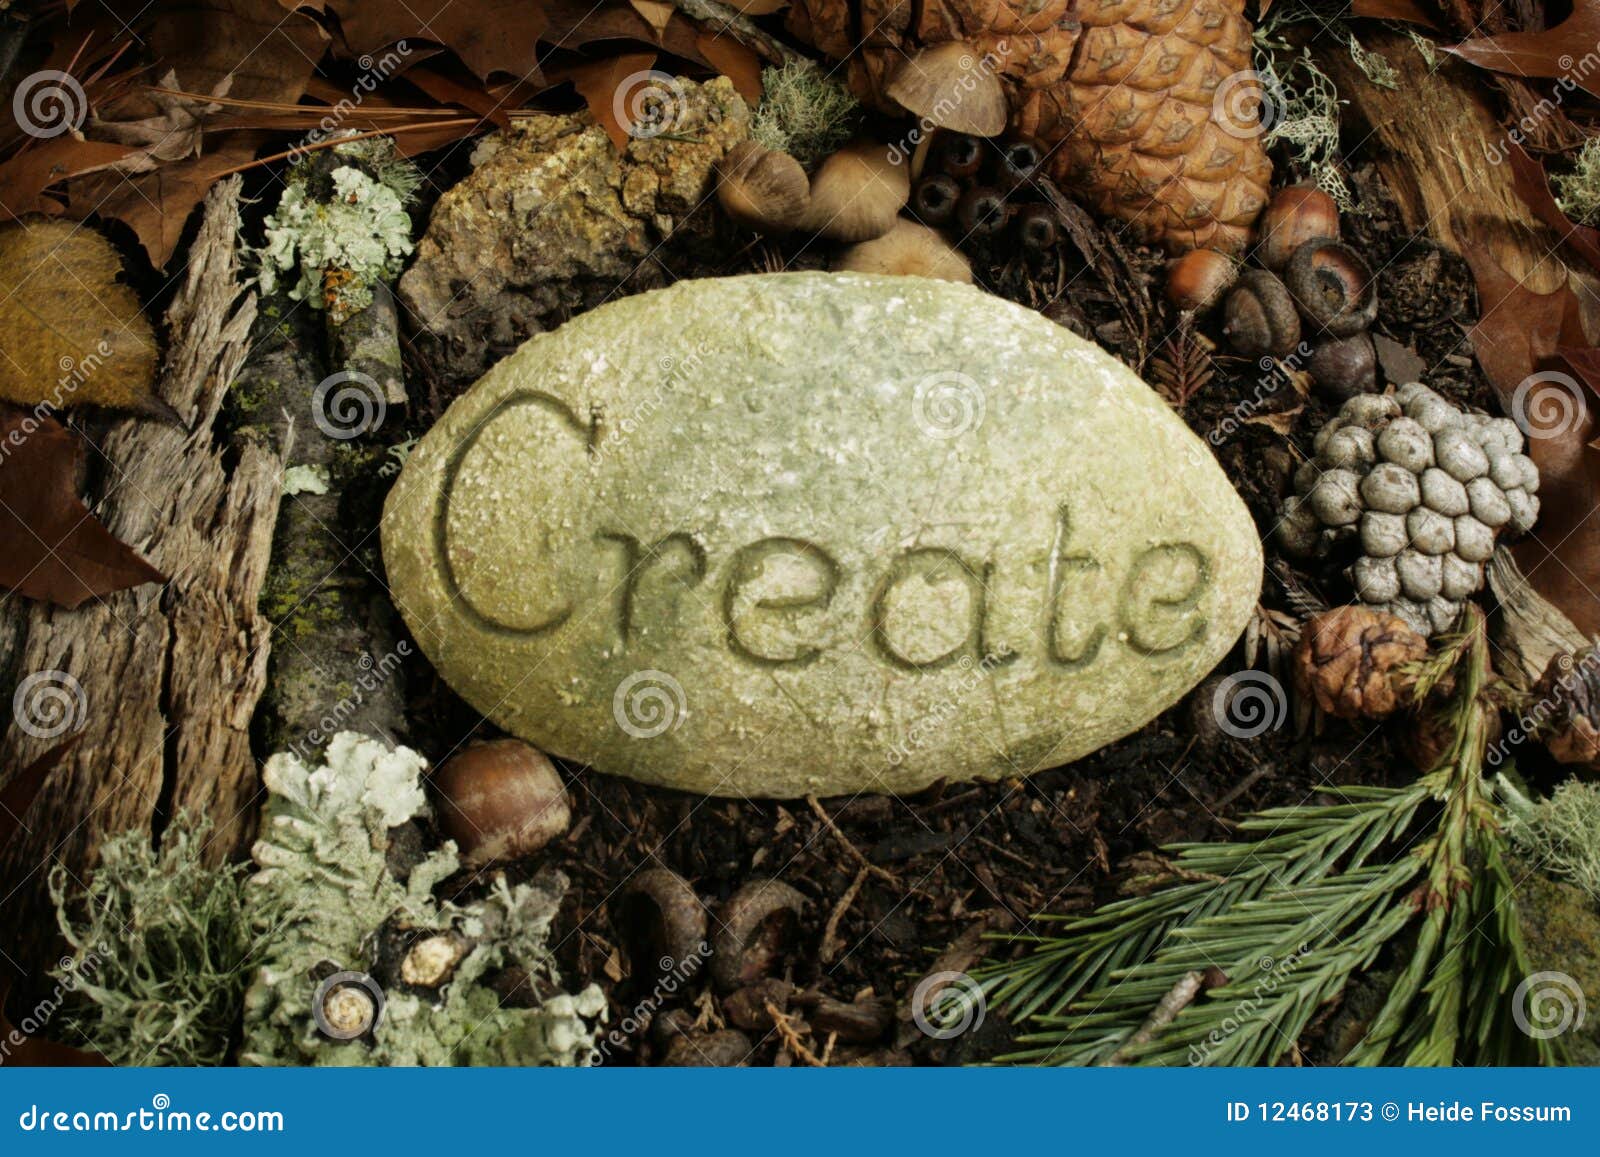 create etched on a stone on the forest floor